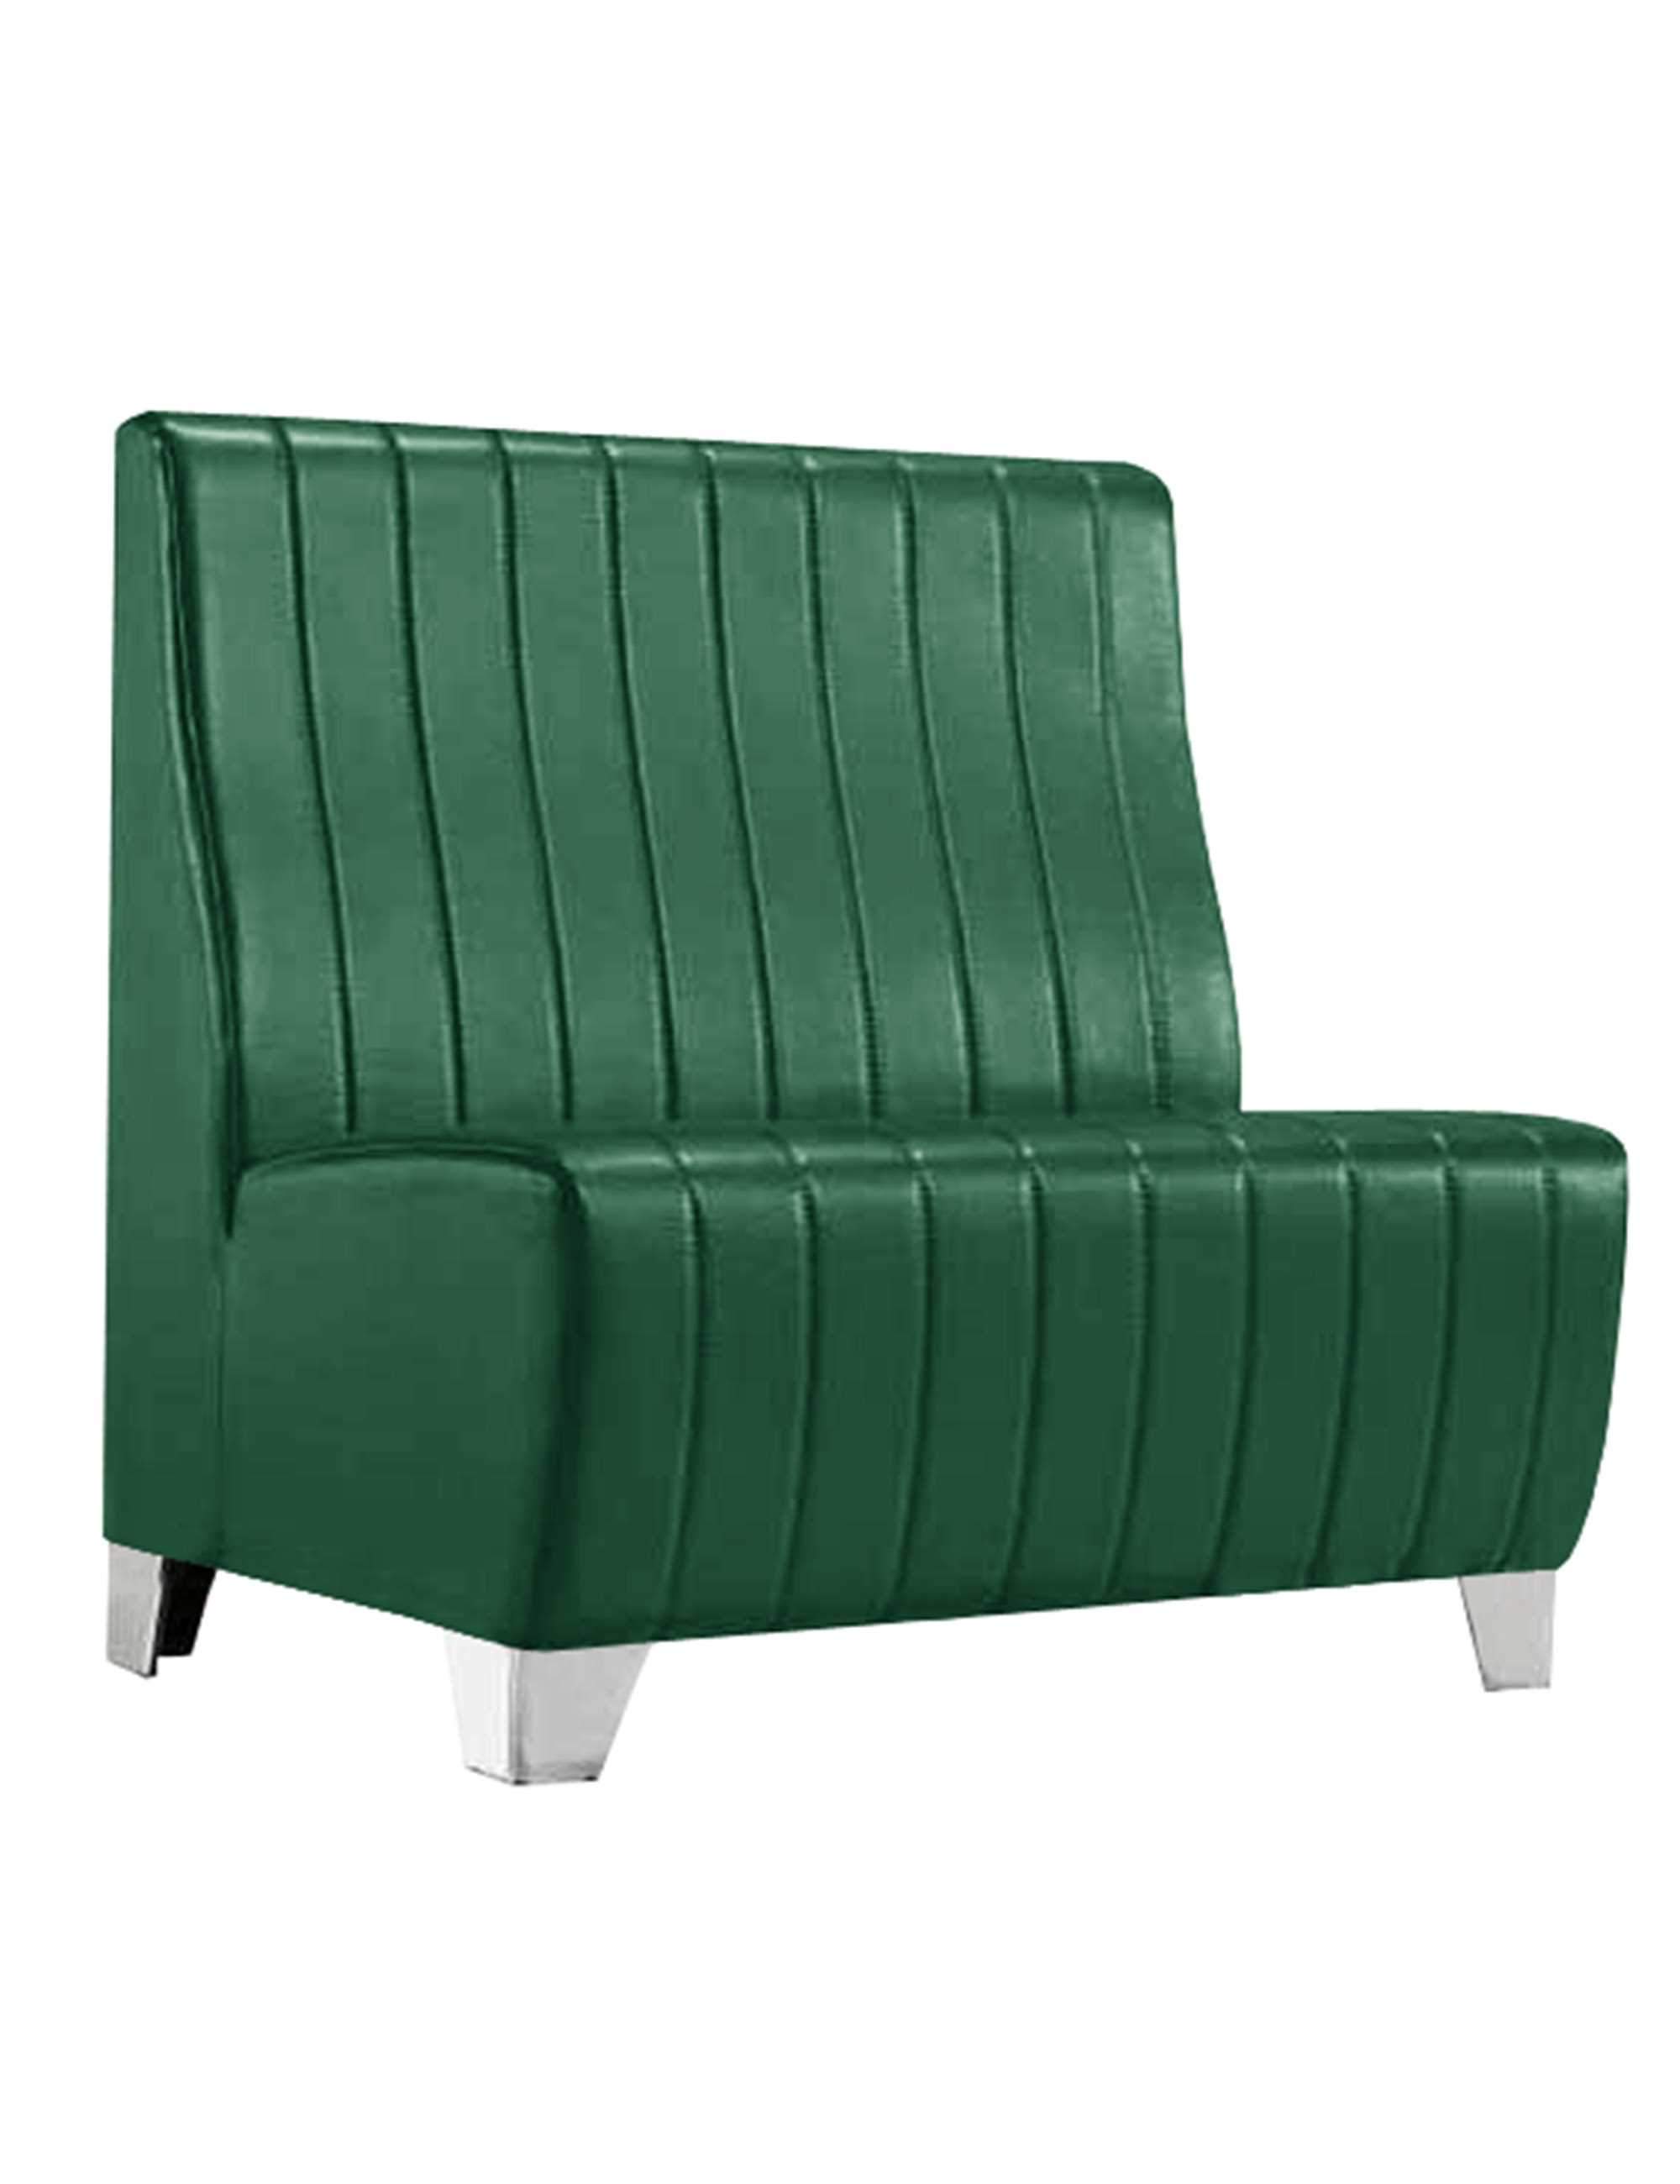 Fluted Back Fixed Seating-Furniture People-Contract Furniture Store